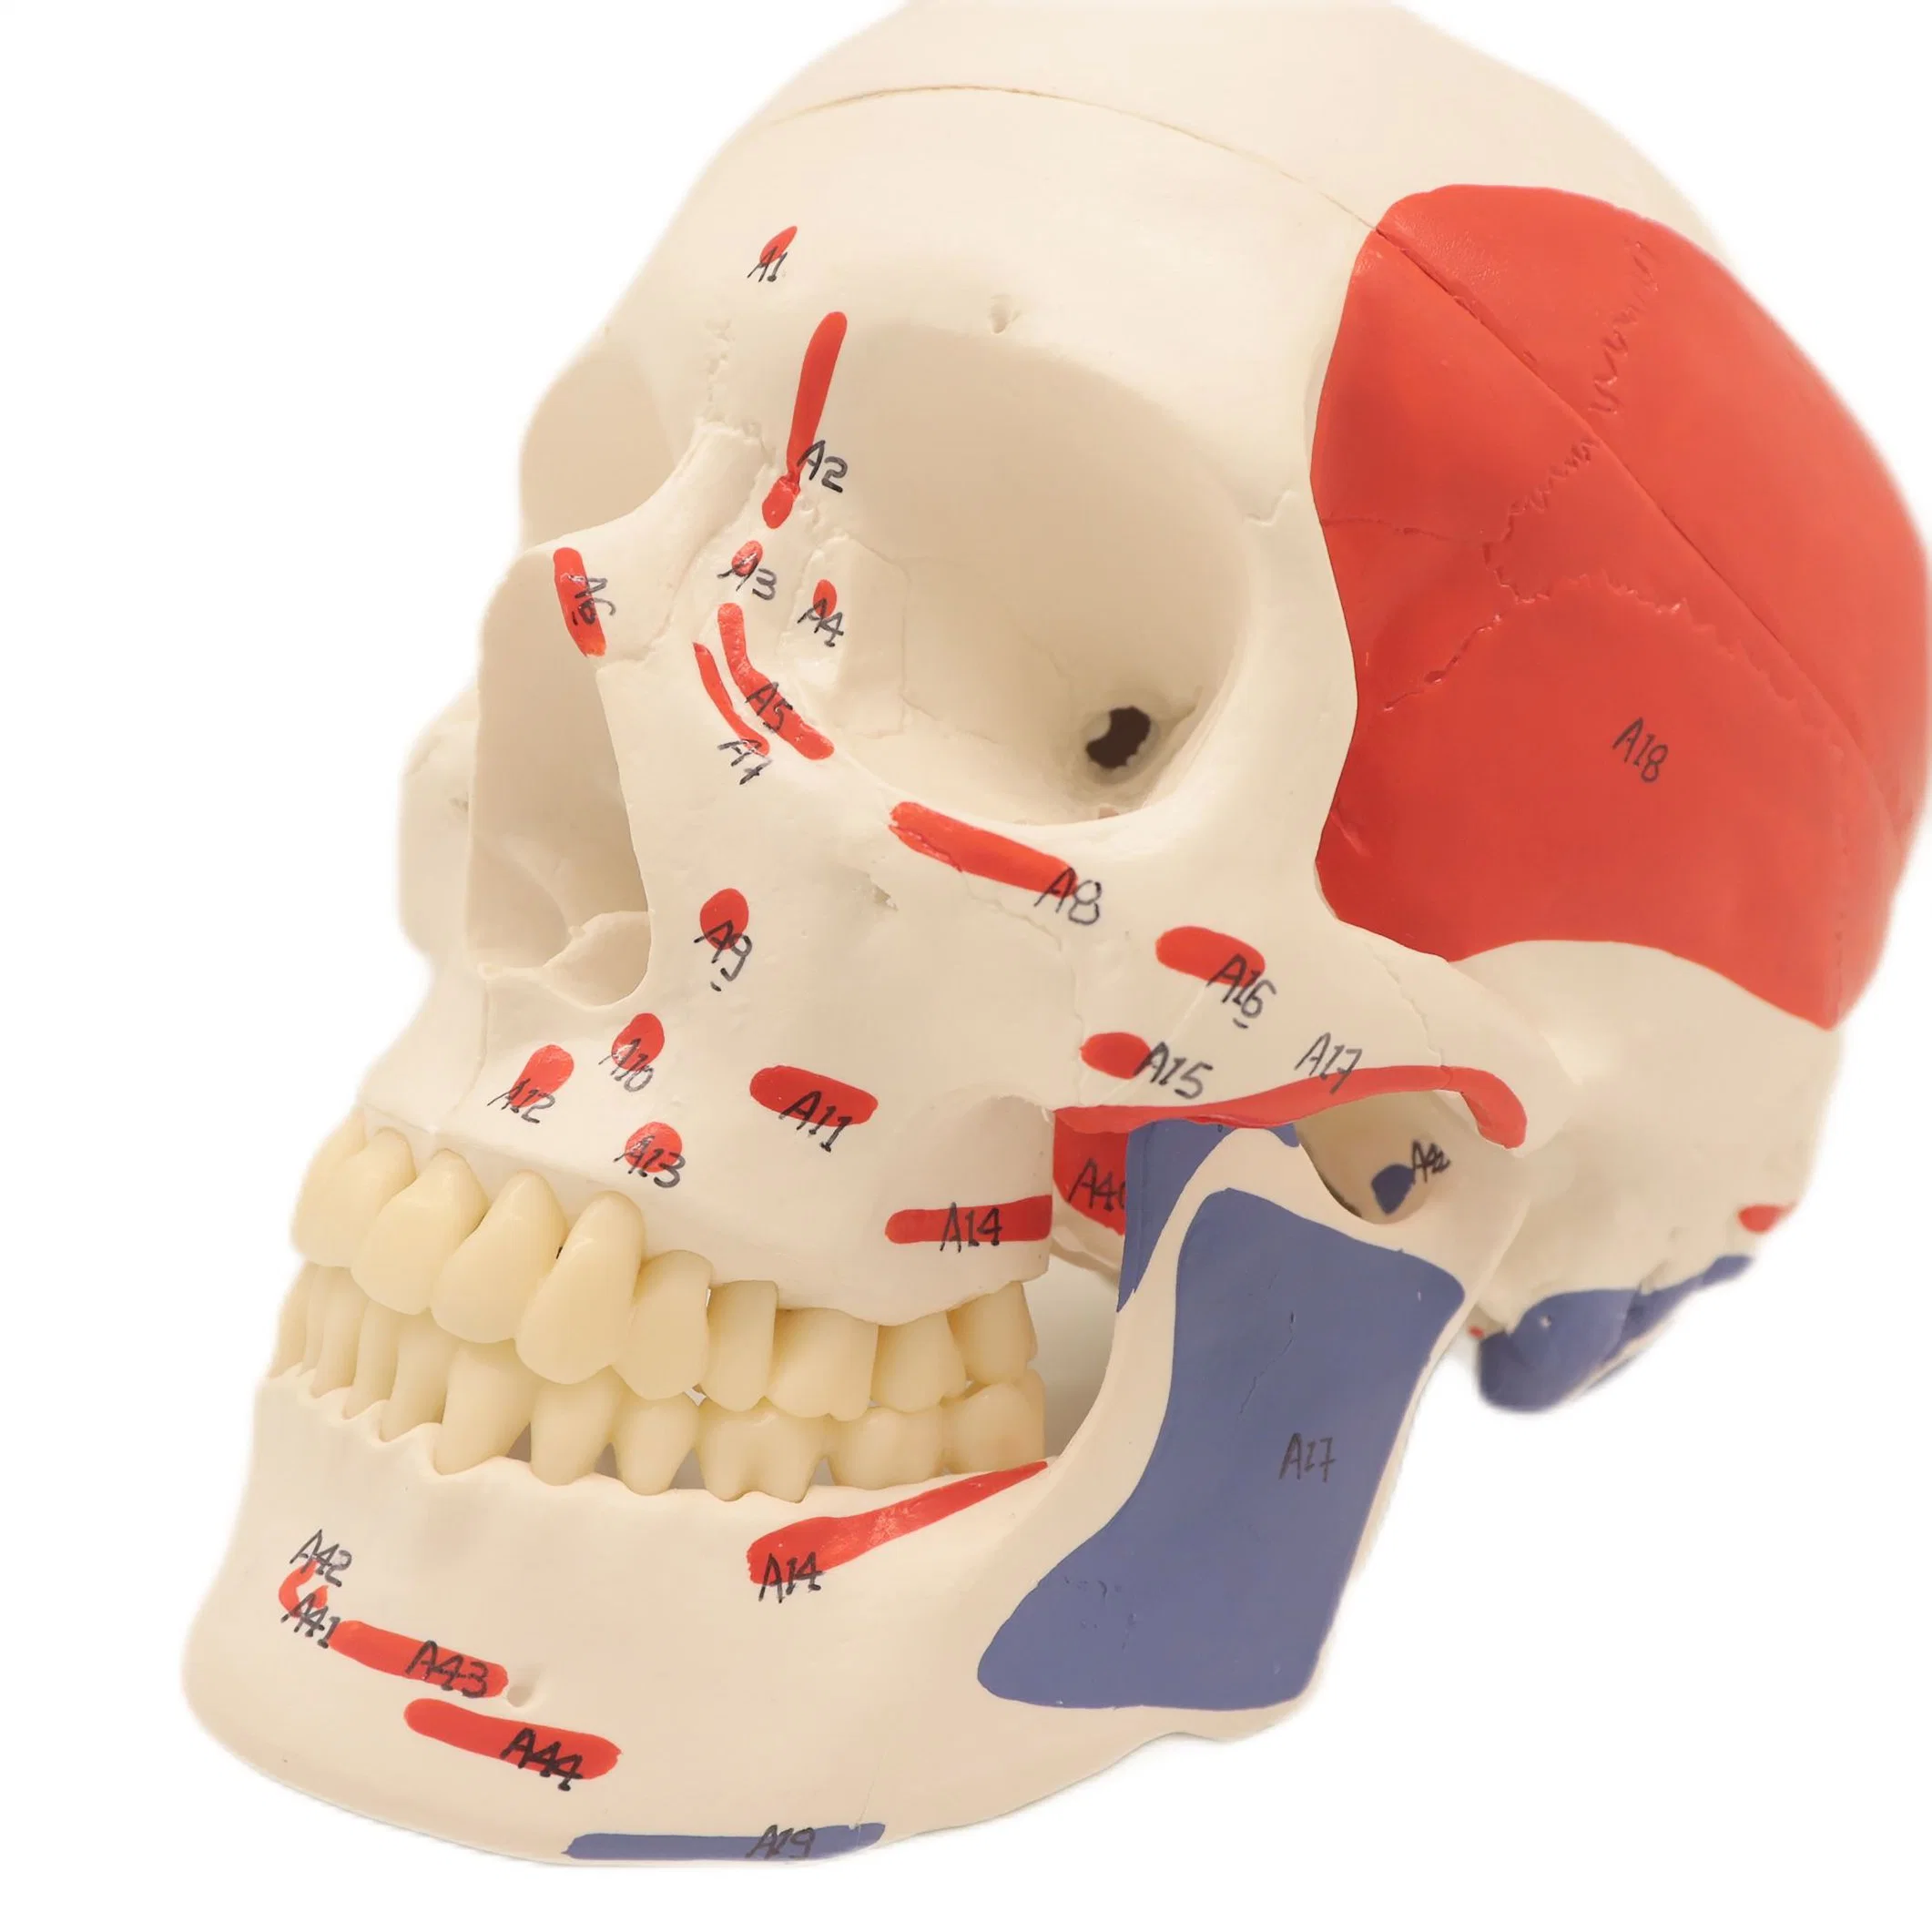 Good Quality Lab Teaching Models 3 Parts Human Muscular Skull Skeleton Models for Students